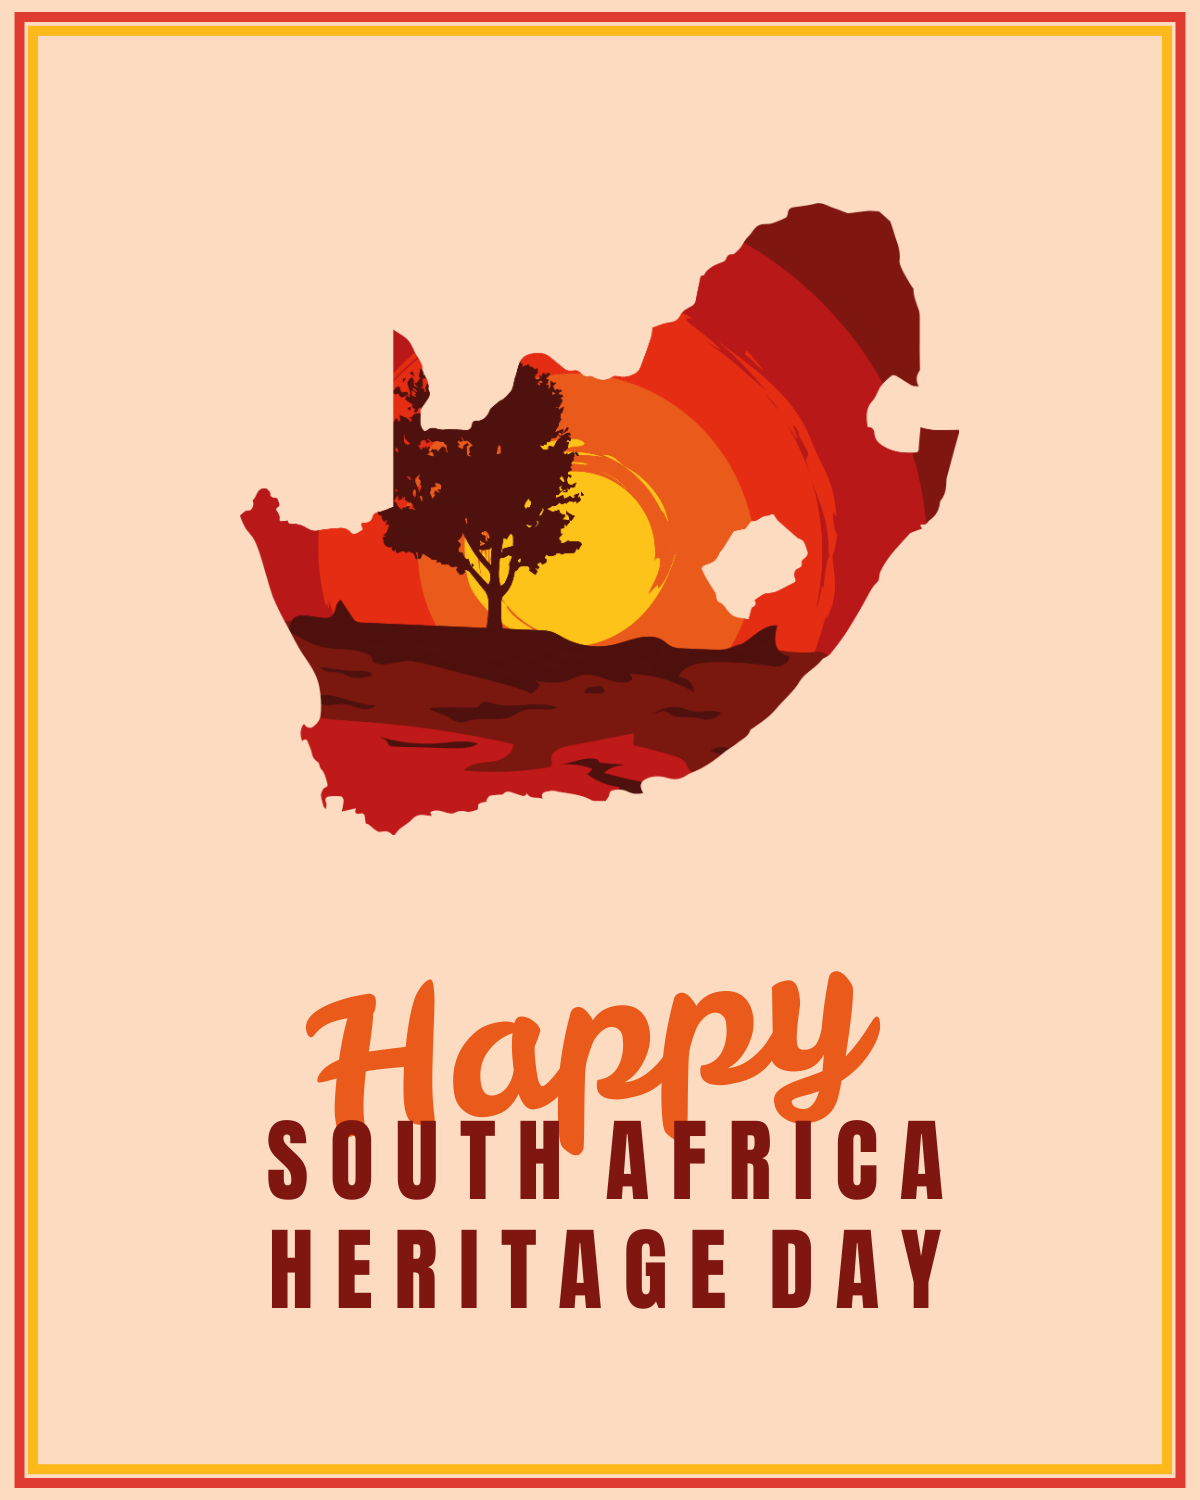 South Africa Heritage Day Facebook Post